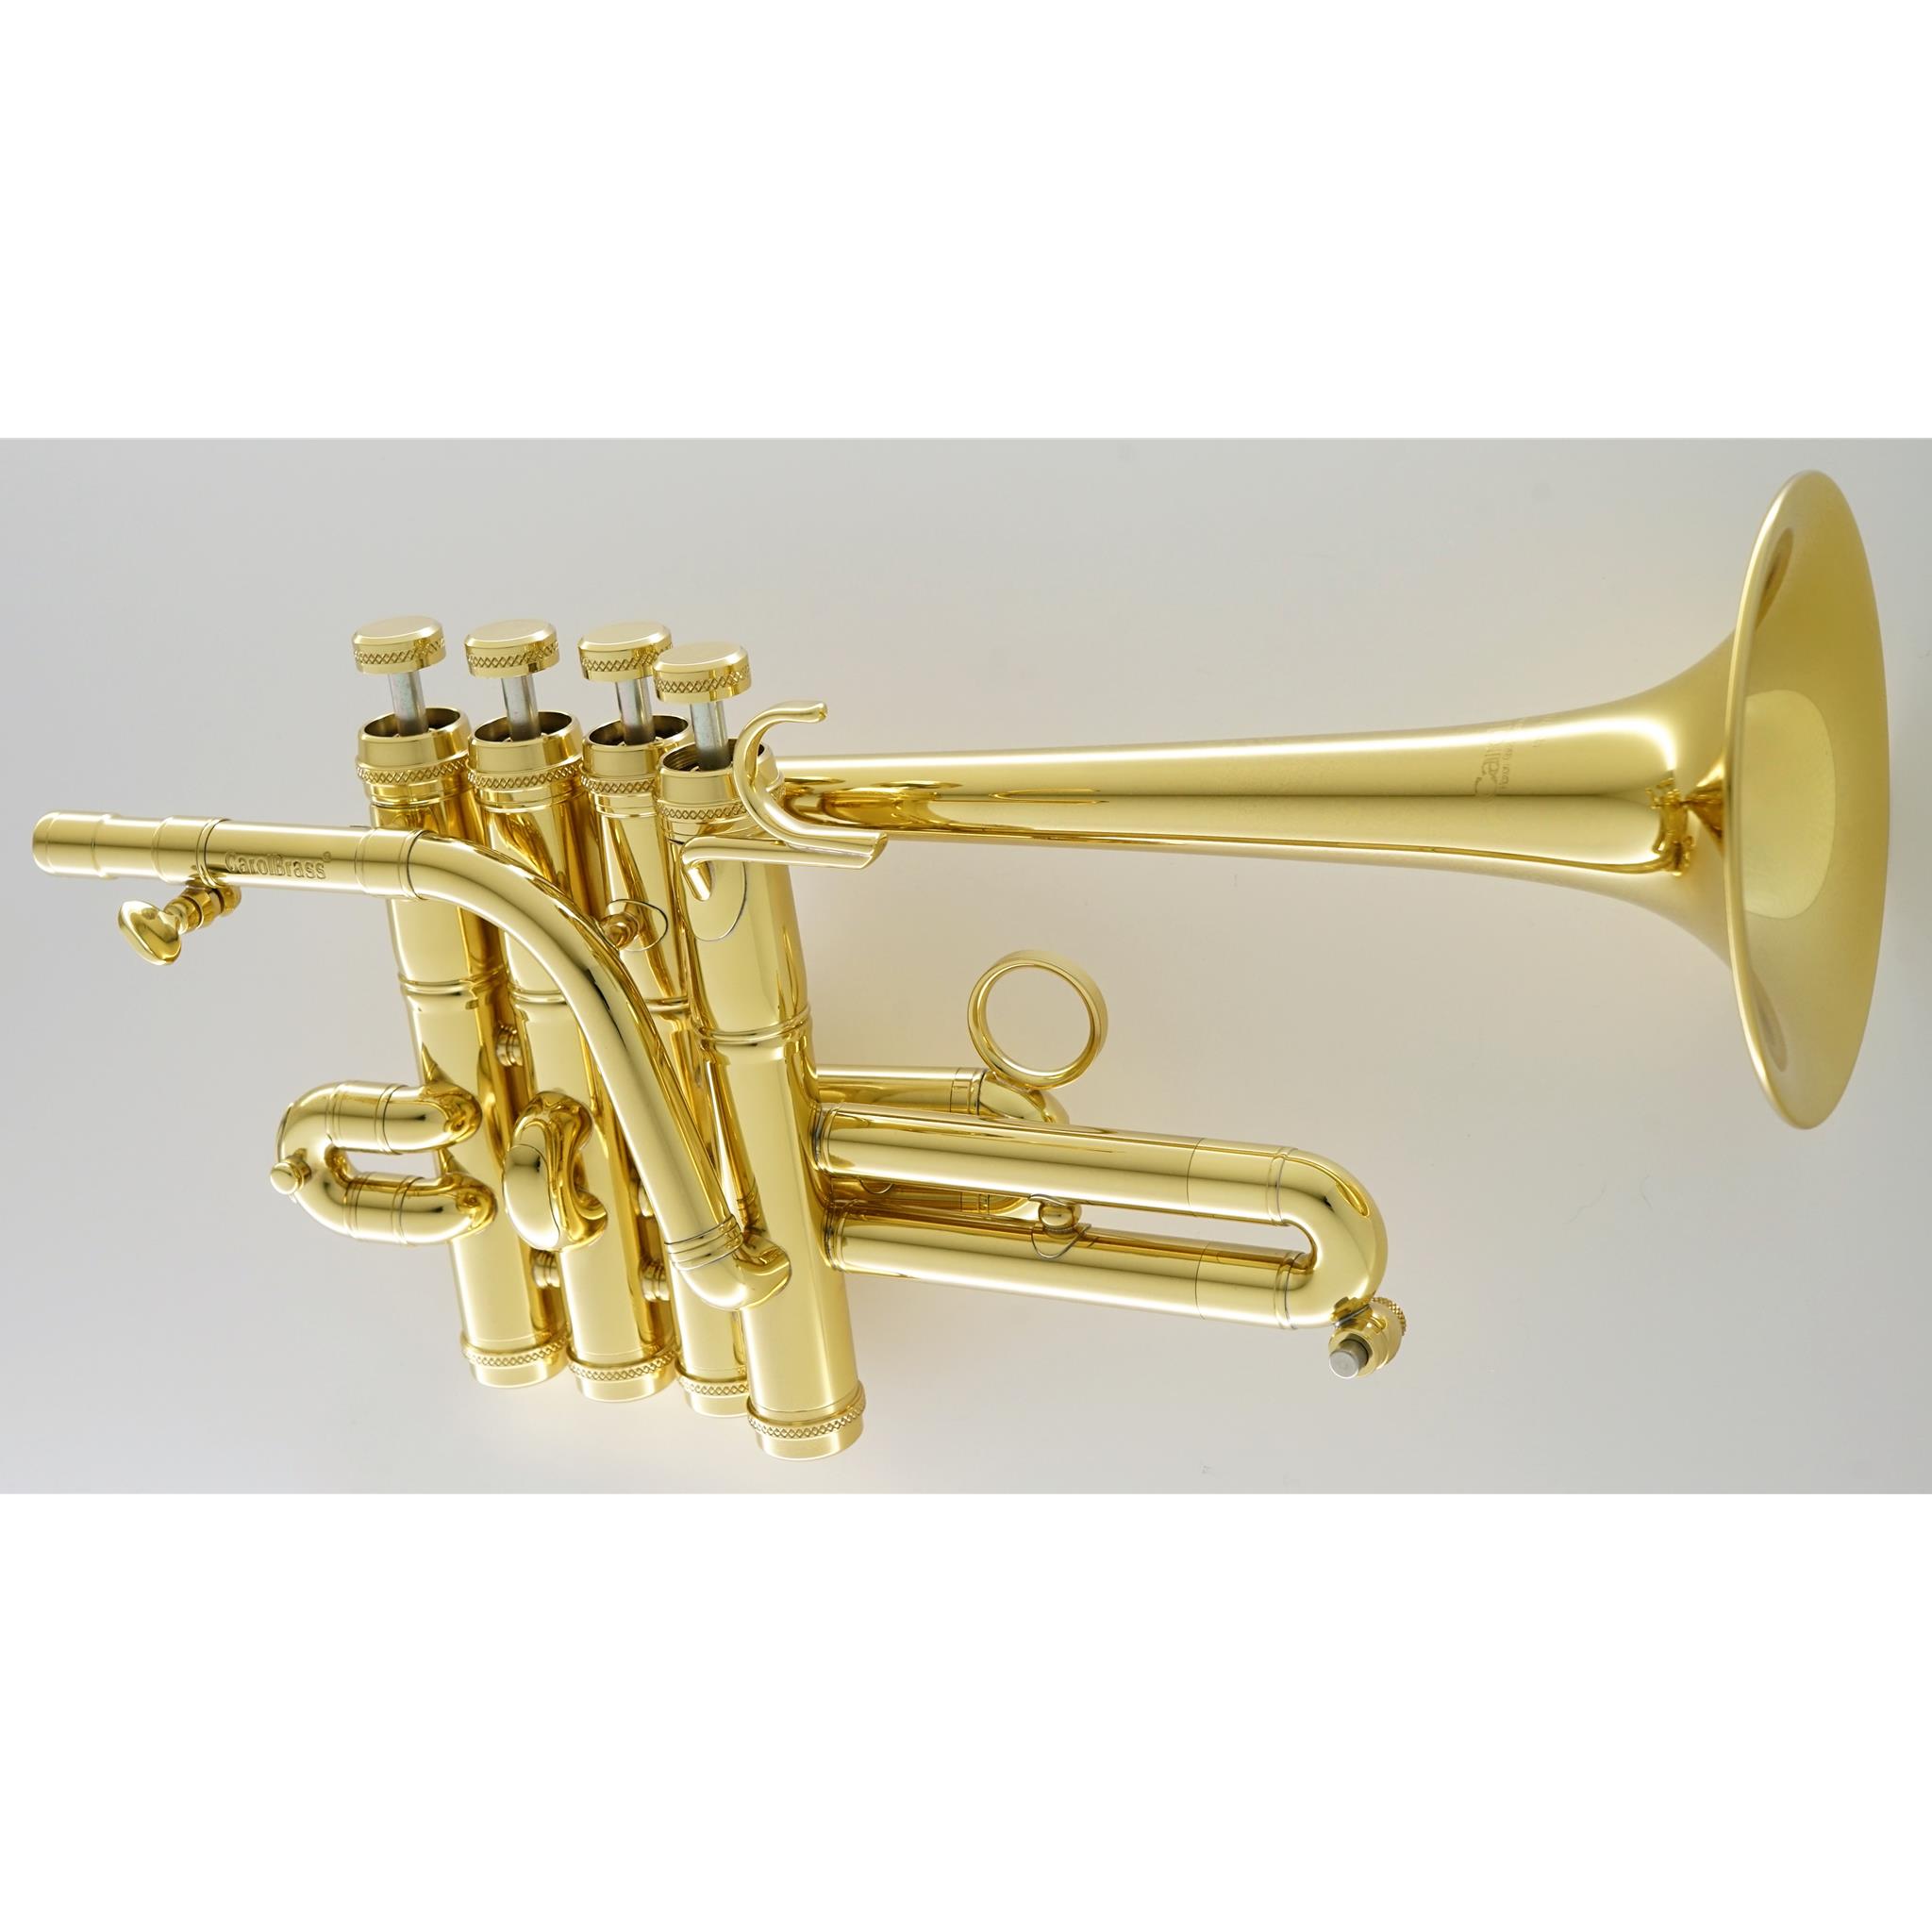 Carol Brass 4 Valve Bb/A Piccolo with trumpet and cornet shanks